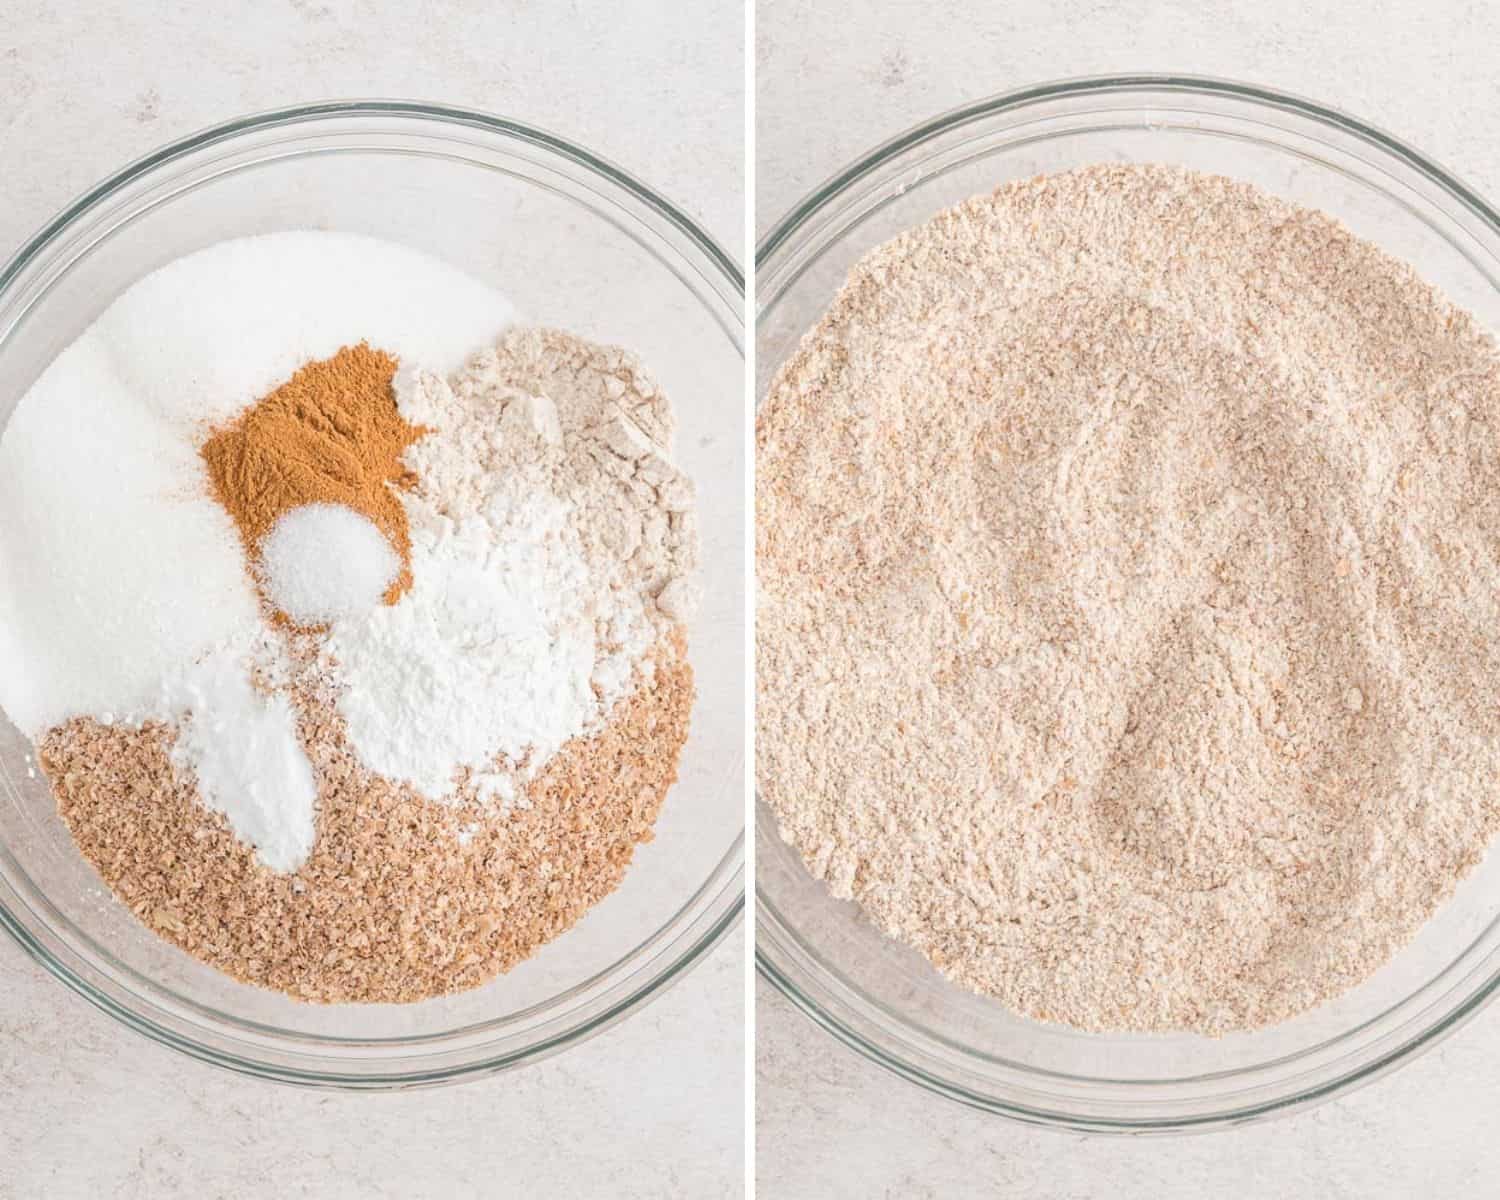 Dry ingredients before and after mixing.